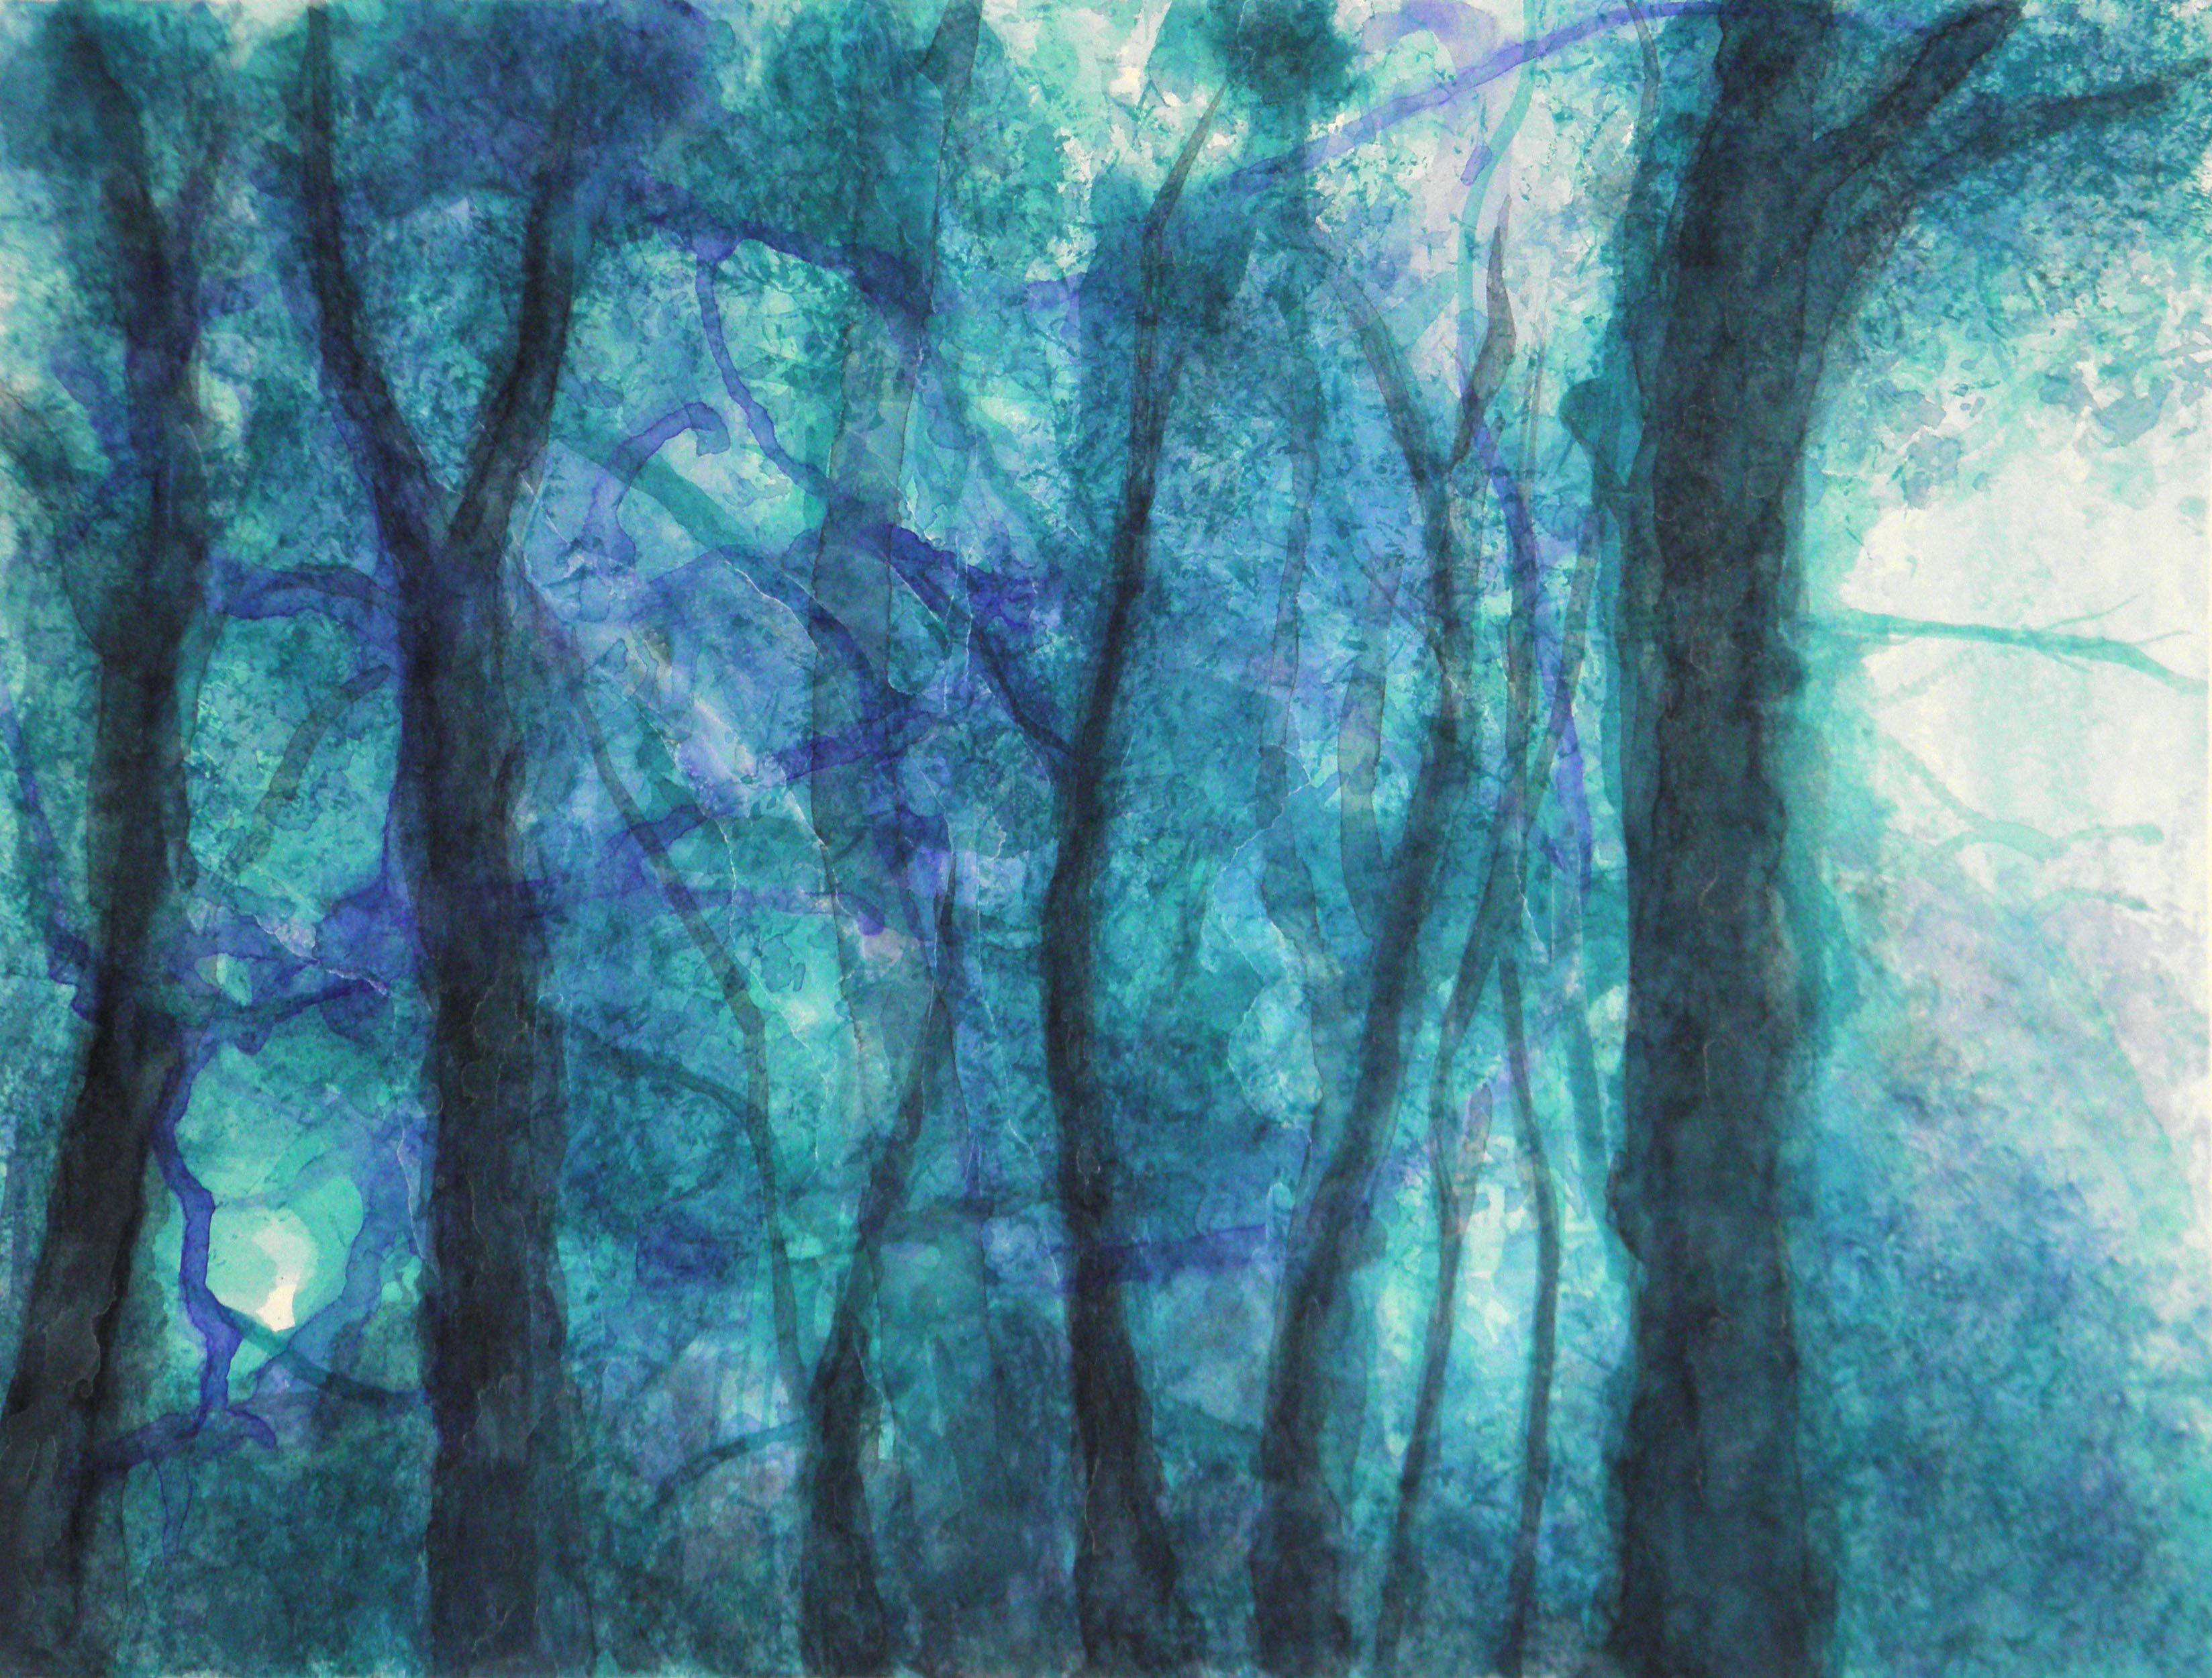 In the woodland : The witches trees #2, Painting, Watercolor on Paper - Art by Fabienne Monestier